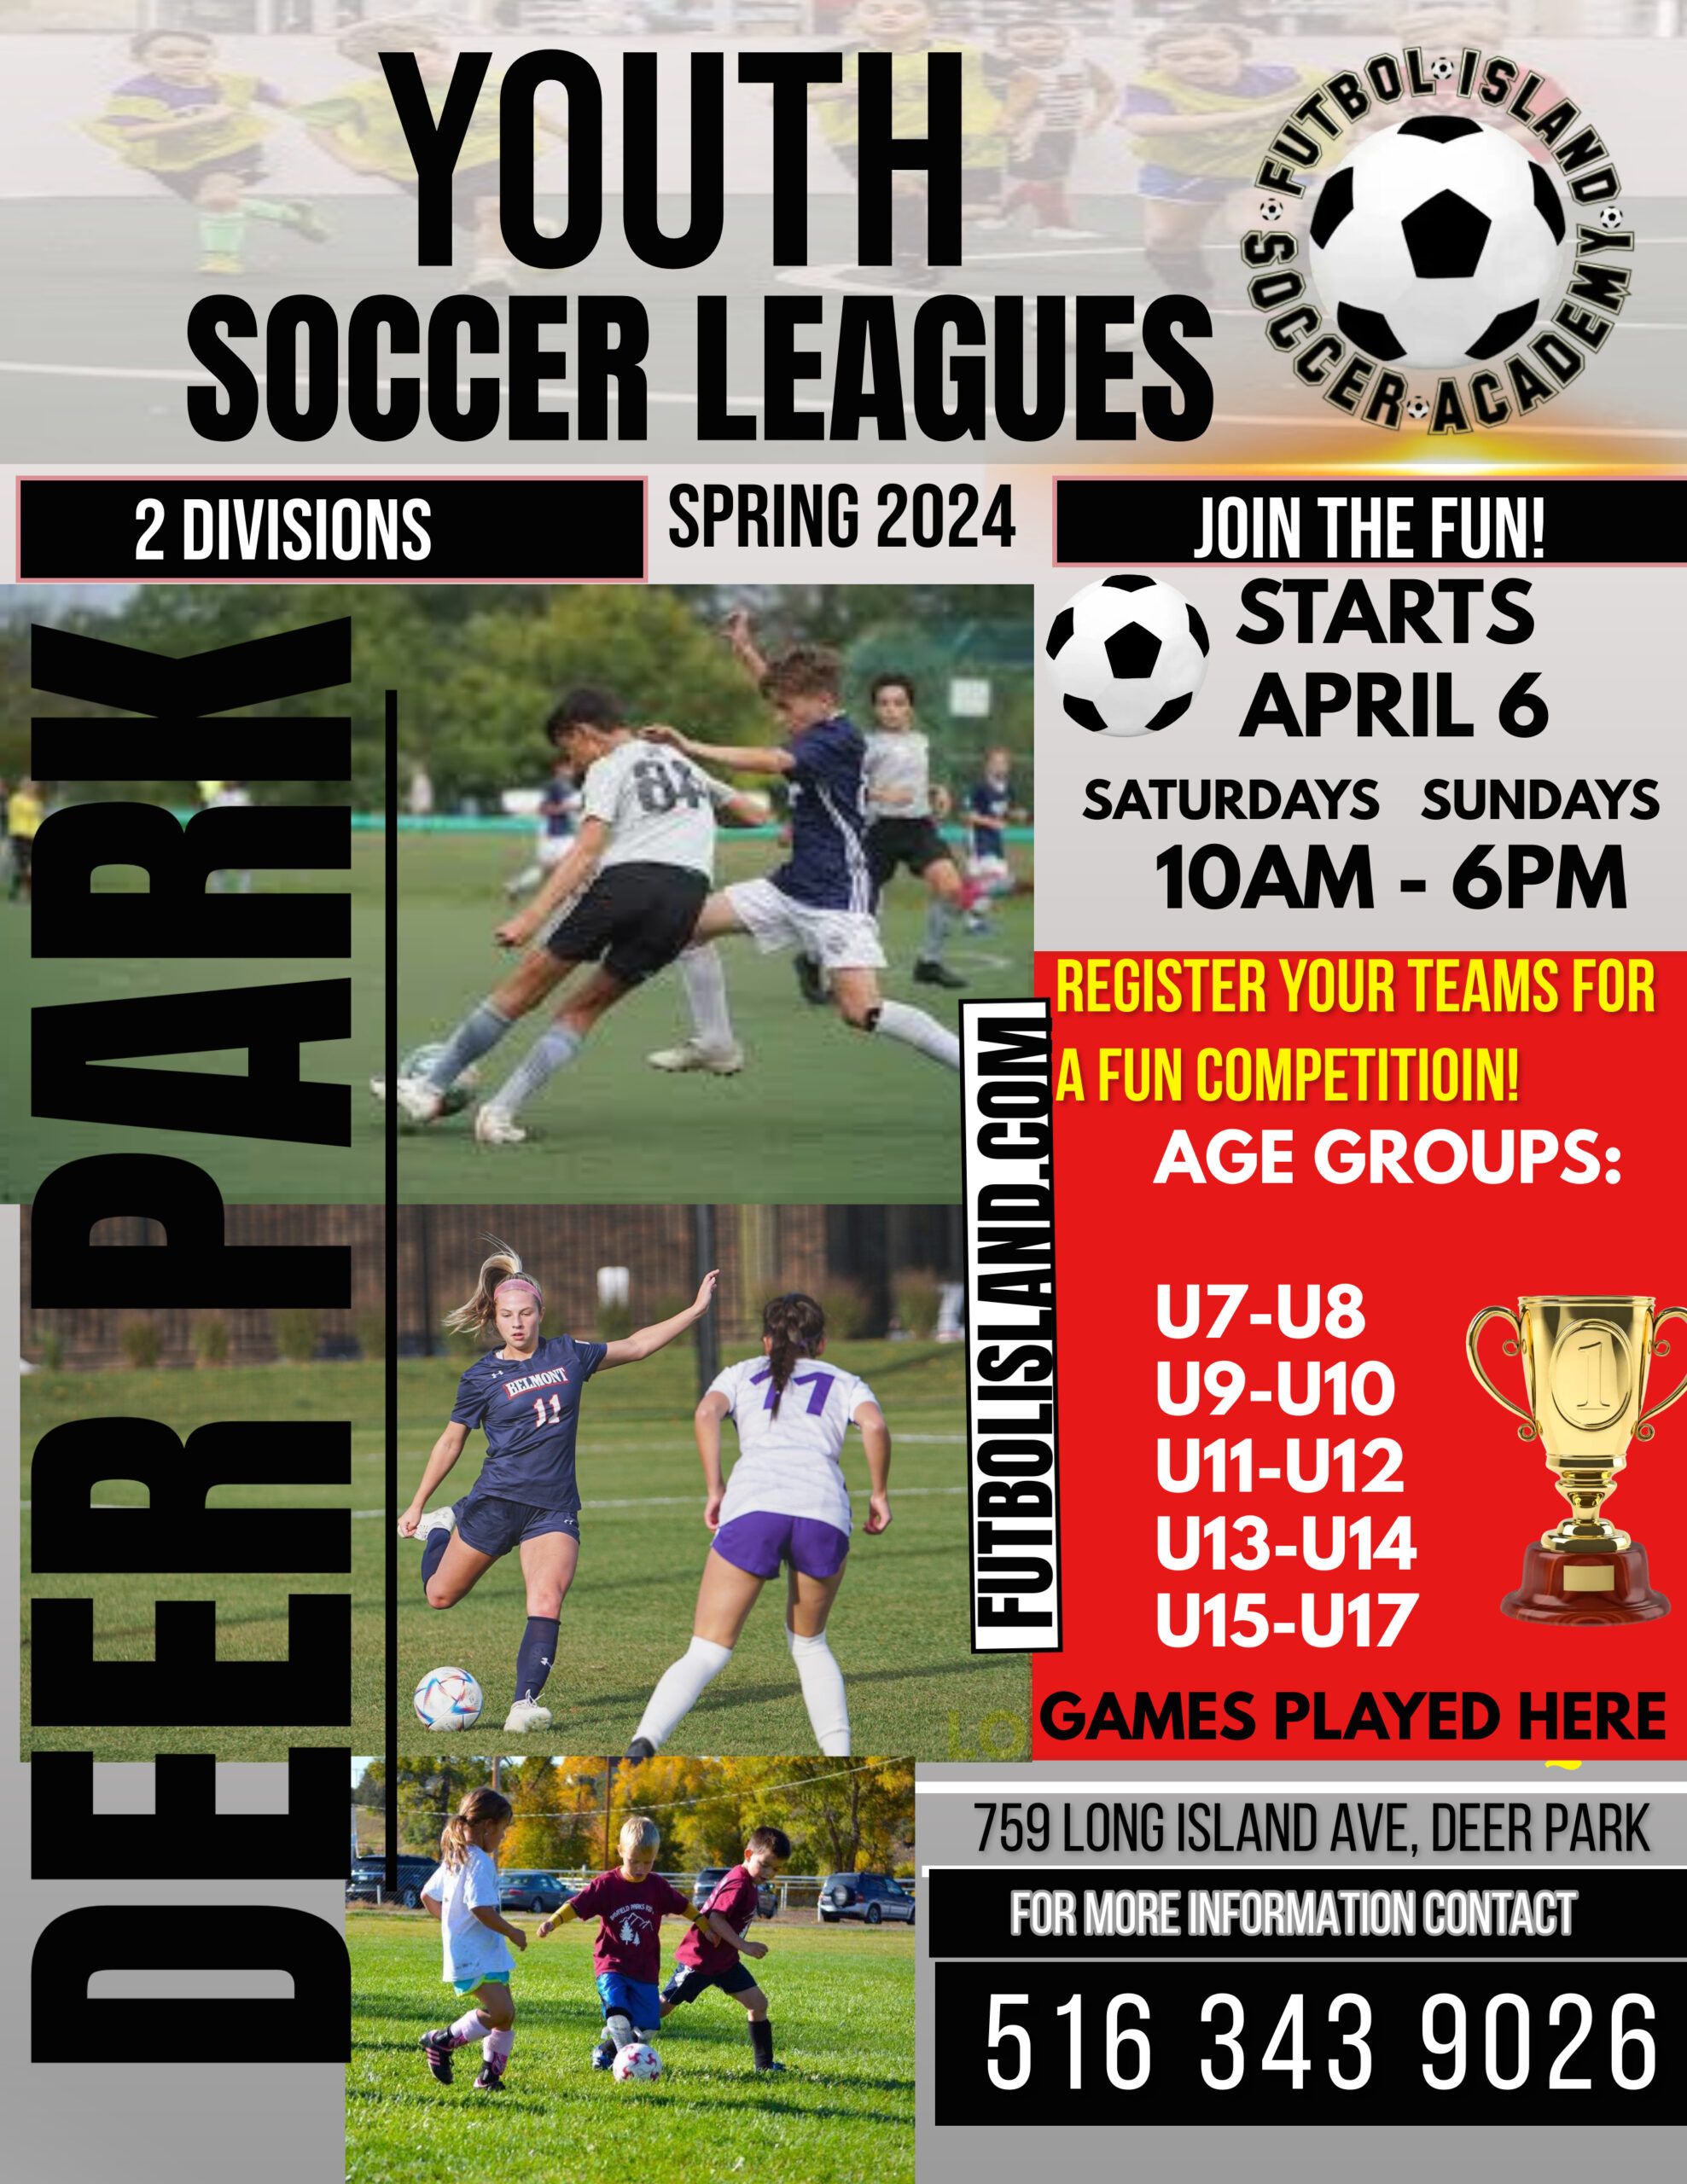 YOUTH SOCCER LEAGUES DEER PARK (1) (2)